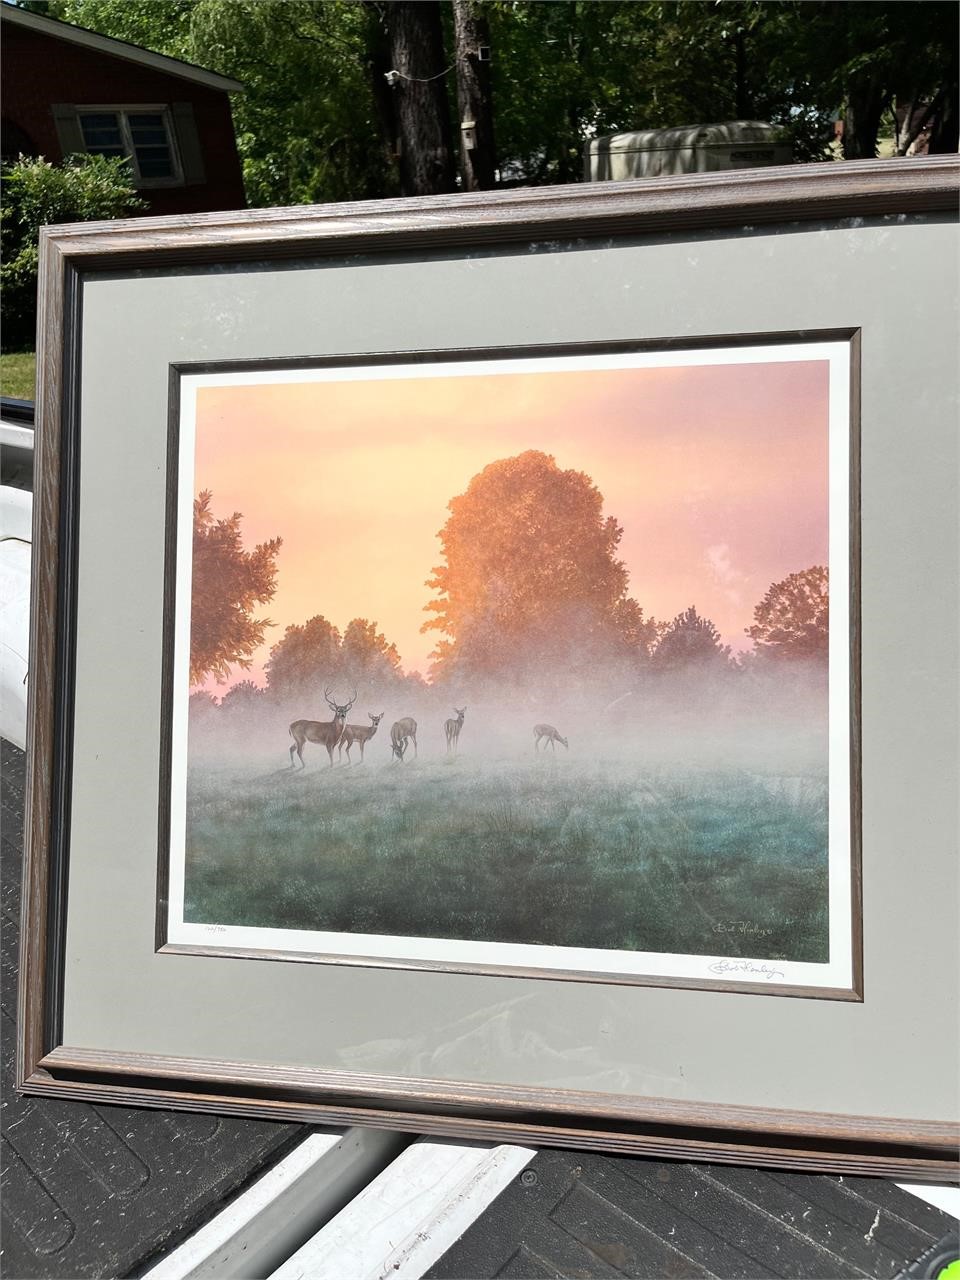 Bob Henley "Misty Morning" Signed and Numbered Art